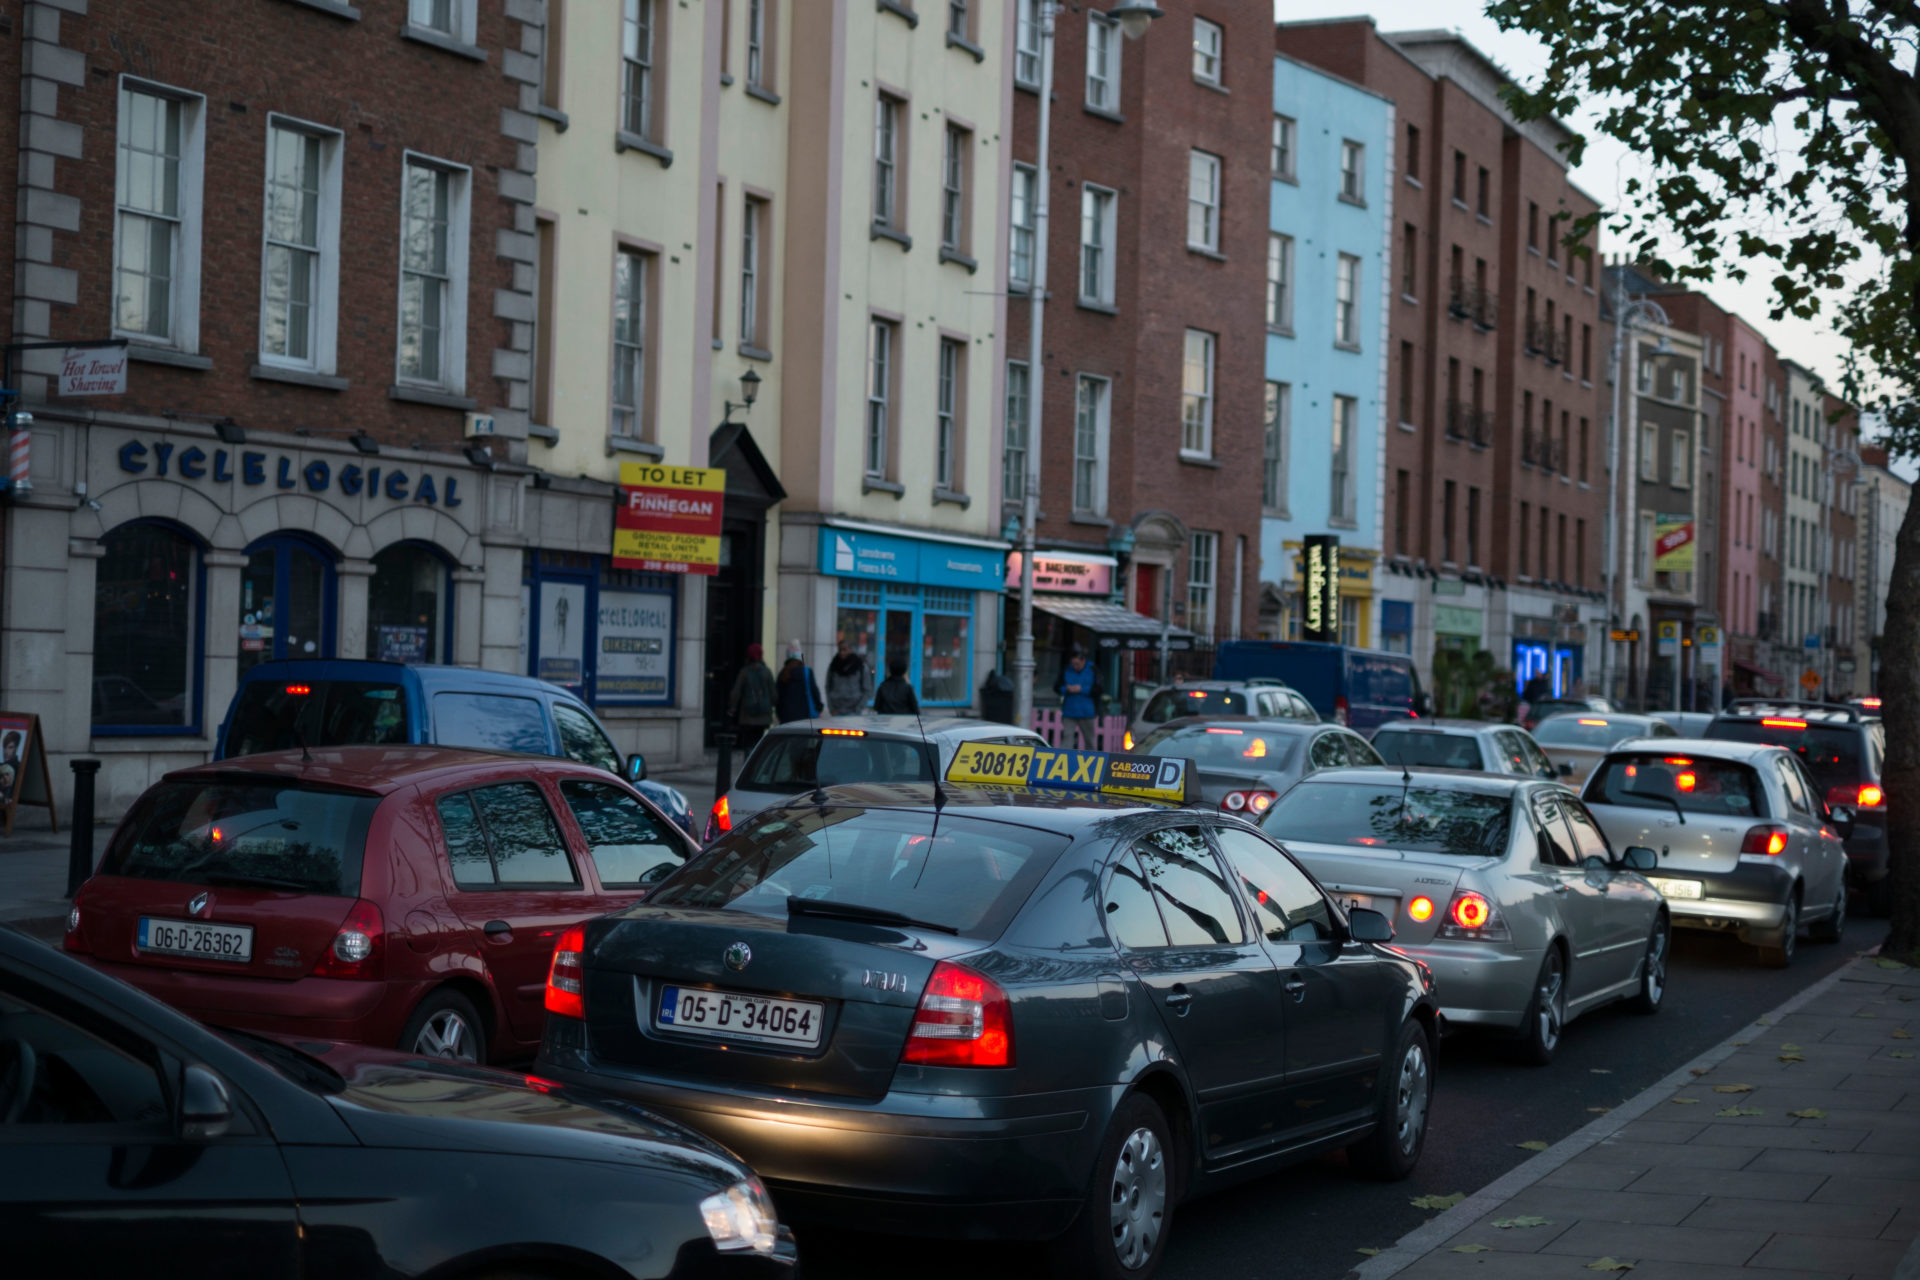 Dublin is second slowest city in the world